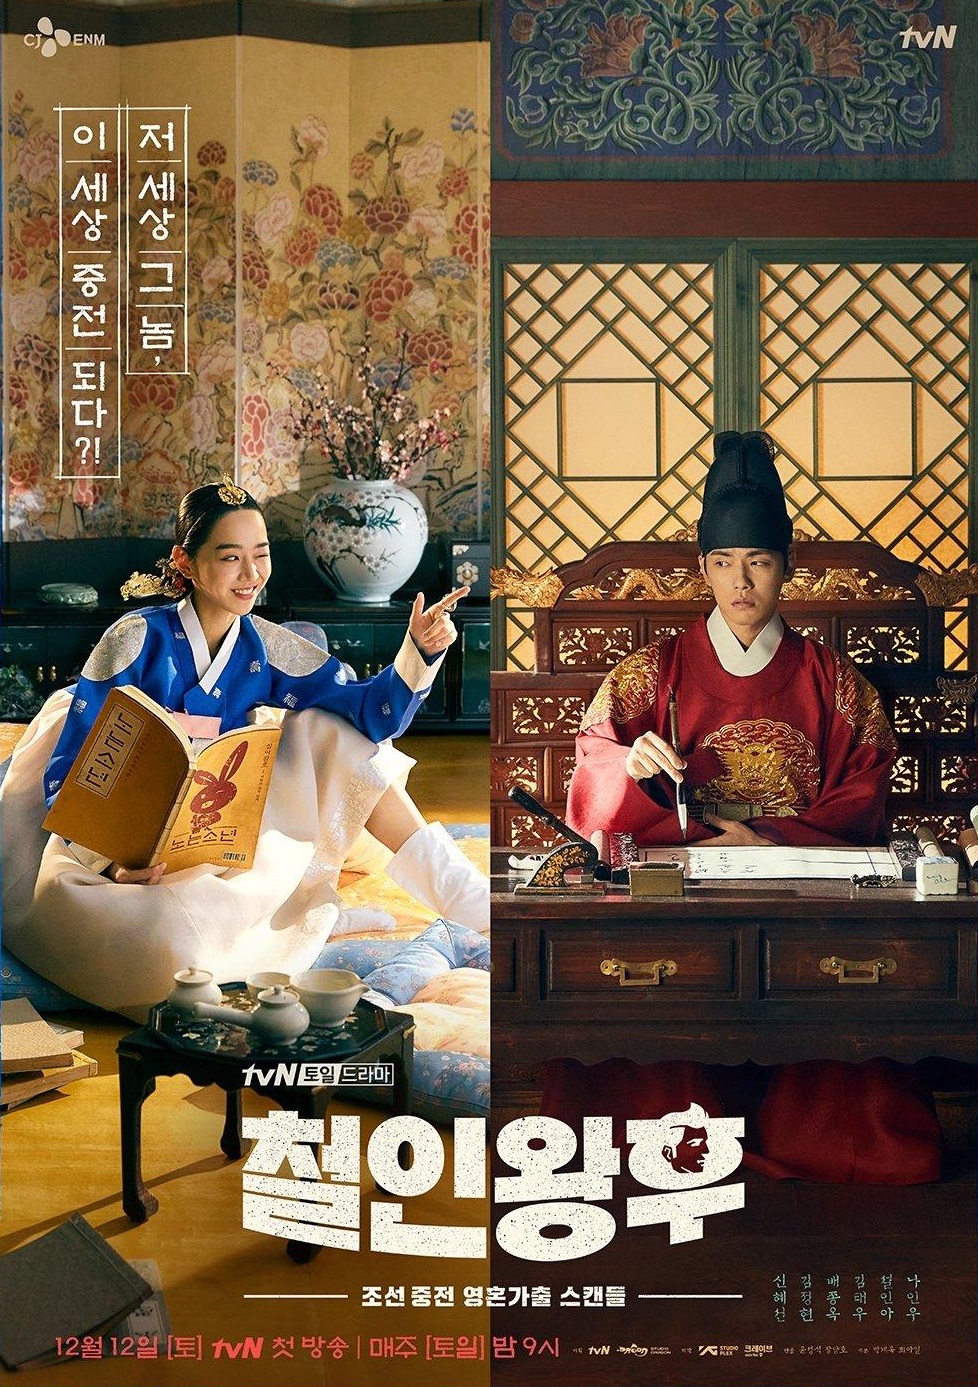 exo-xiumin-to-lend-voice-for-ost-of-tvn-drama-mr-queen-on-january-31